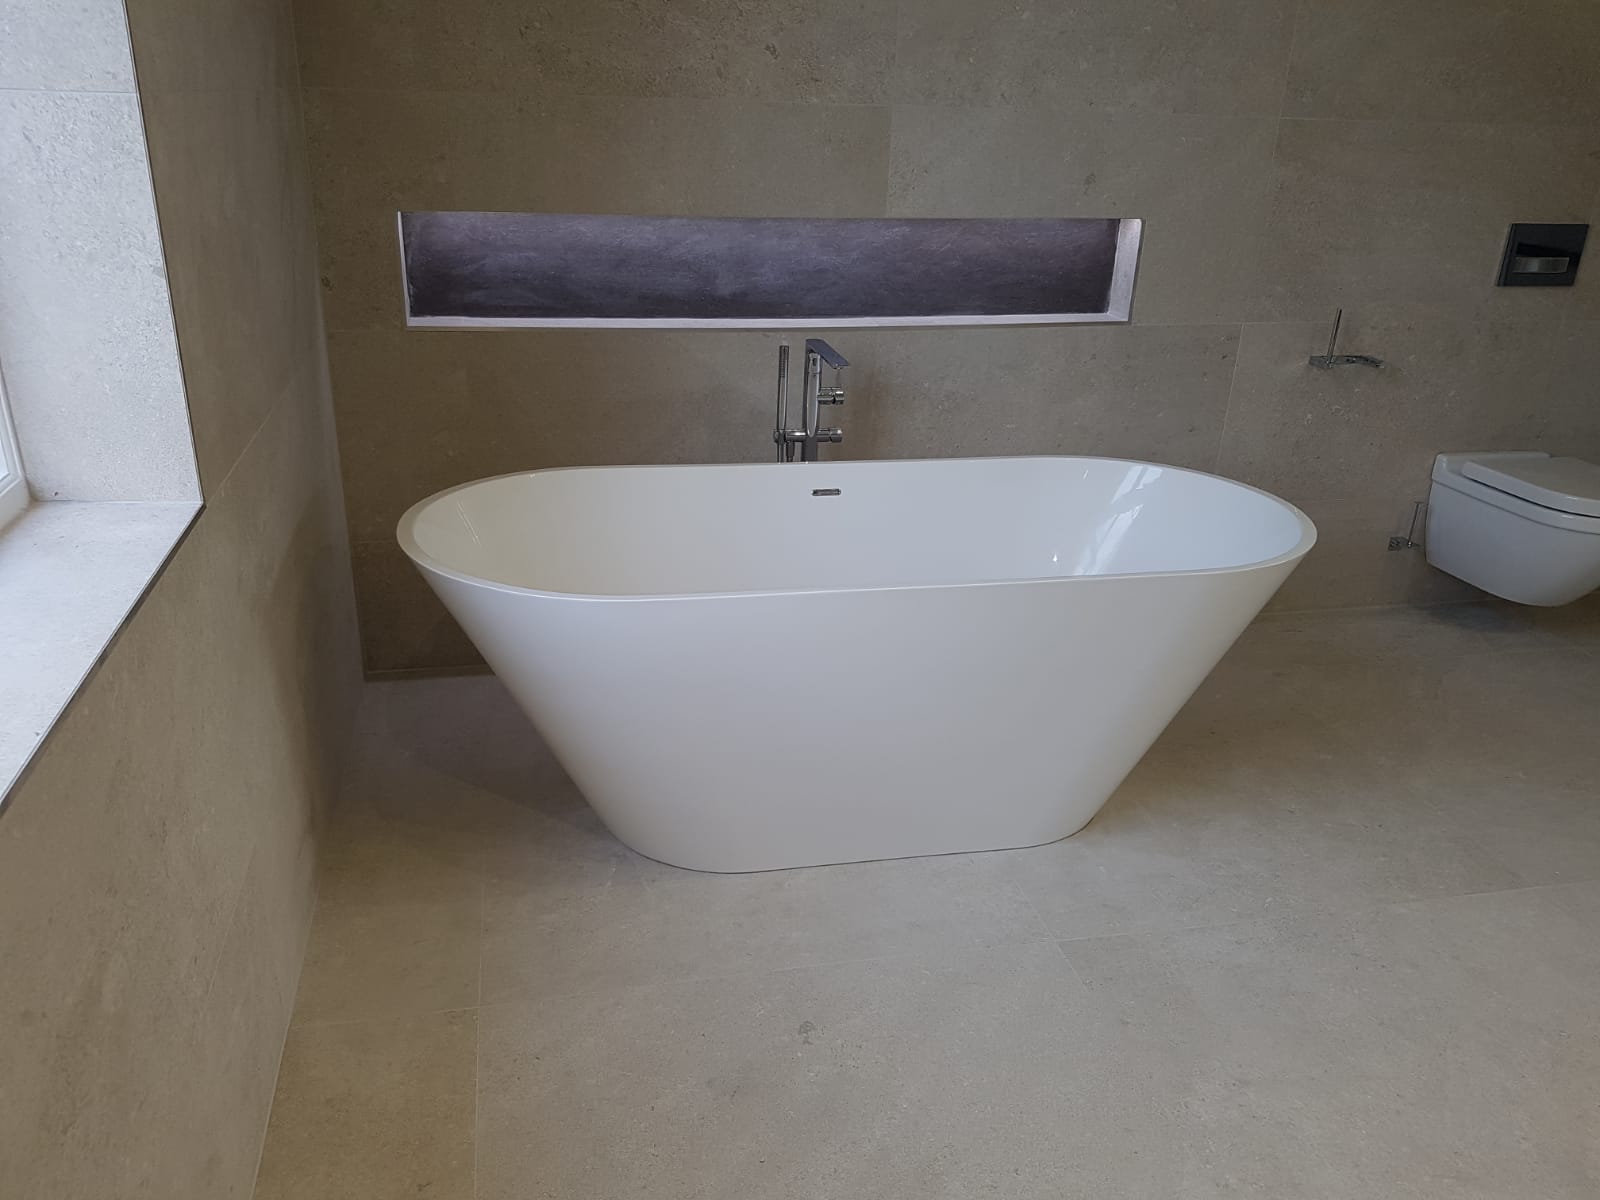 Local bathroom fitting specialists 